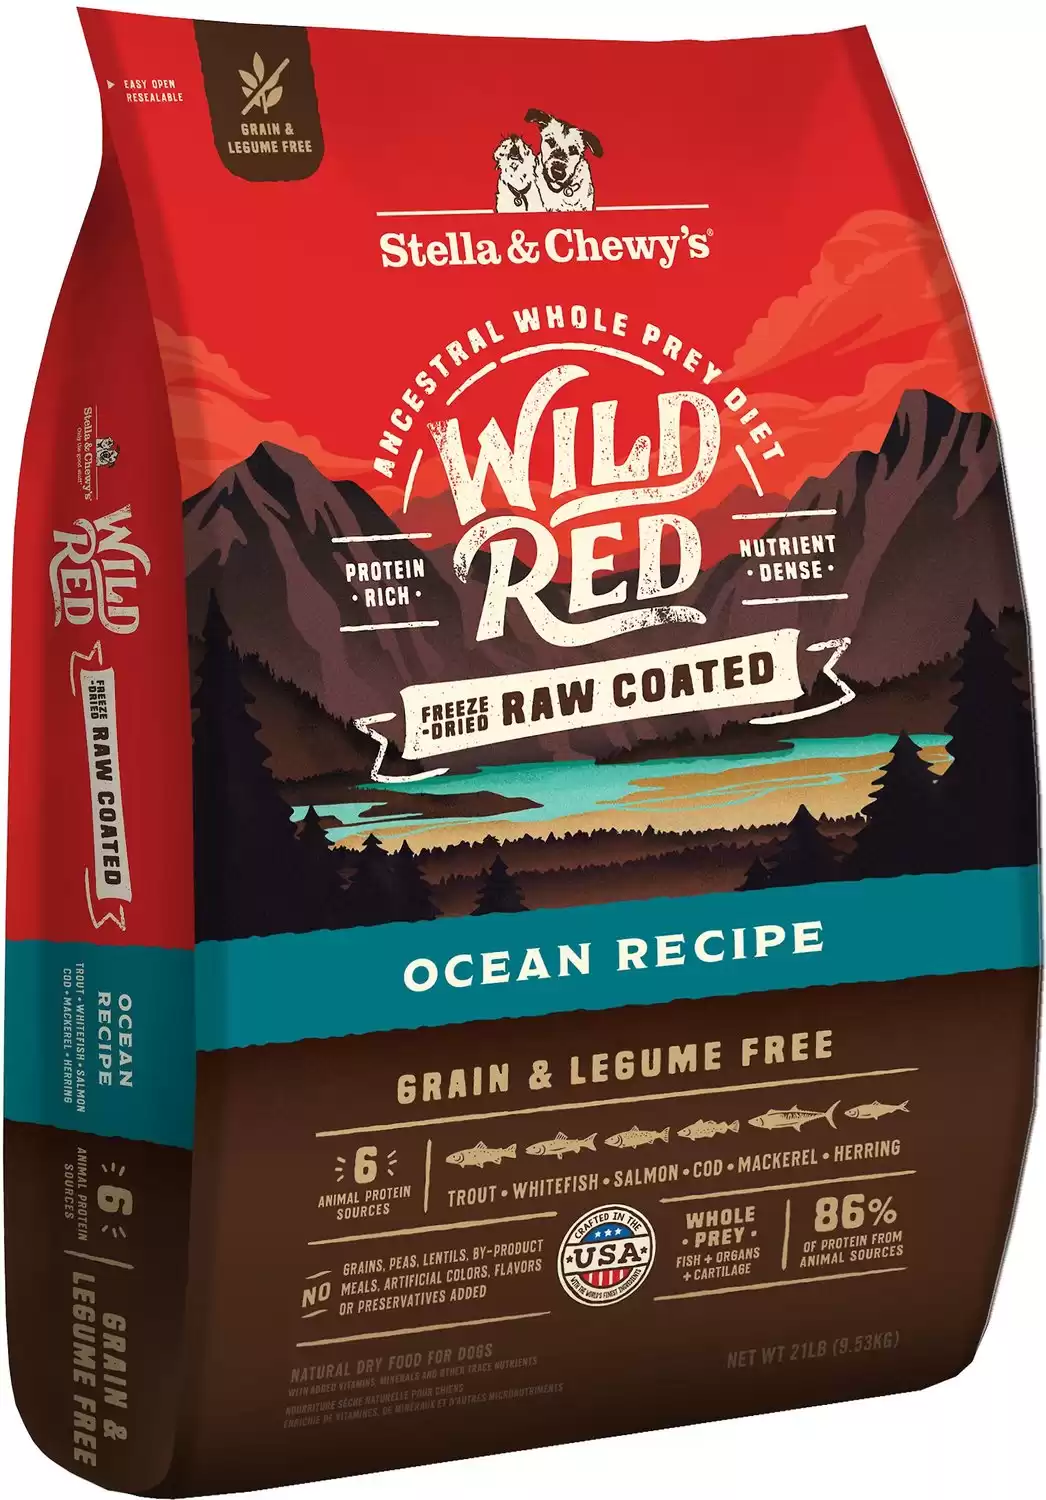 Stella & Chewy's Wild Red Raw Coated Ocean Recipe Dry Dog Food